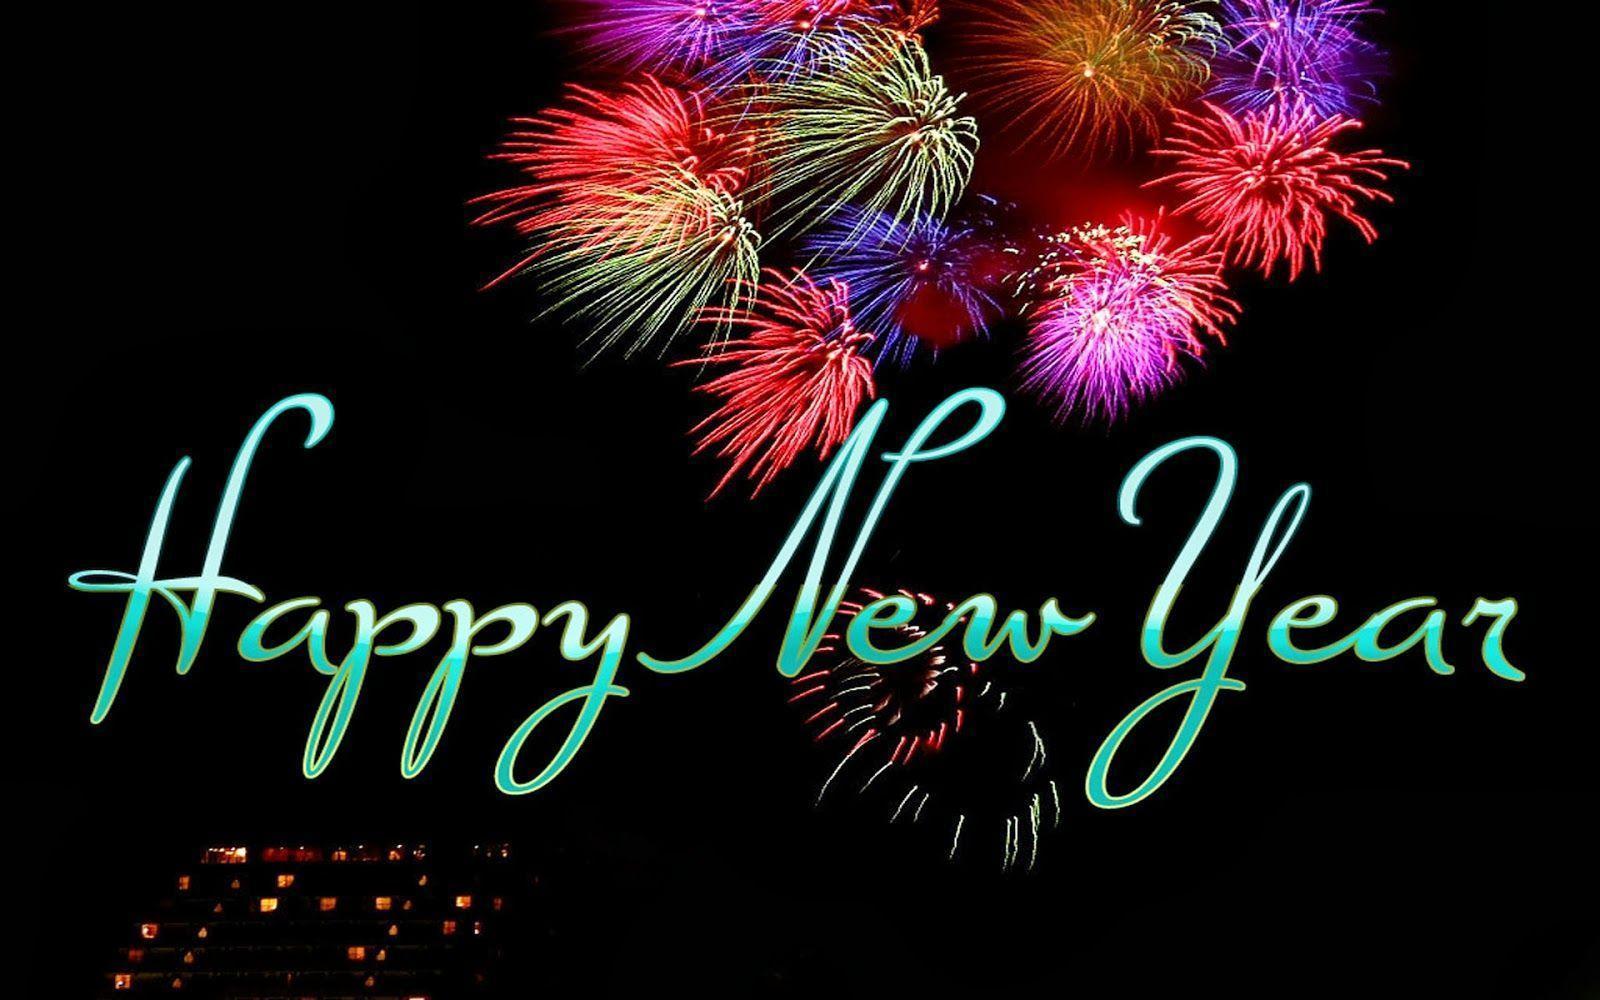 Happy New Year 2013 Wallpaper Free Download